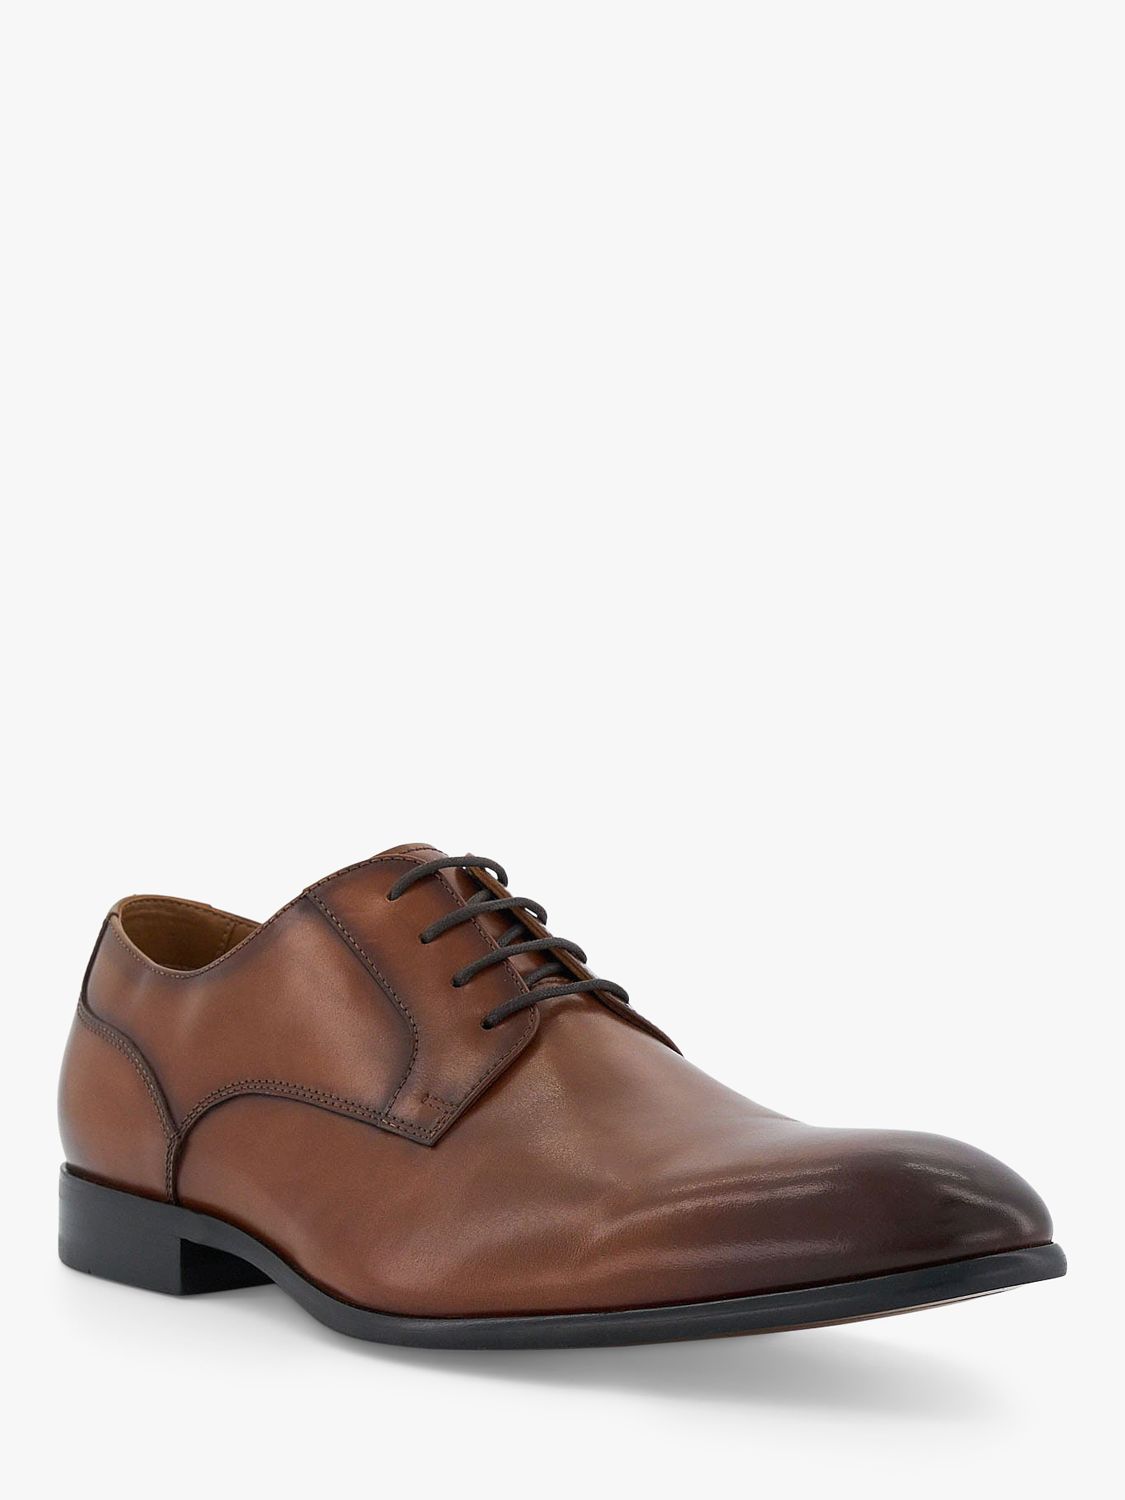 Dune Southwark Leather Lace Up Shoes, Dark Tan at John Lewis & Partners